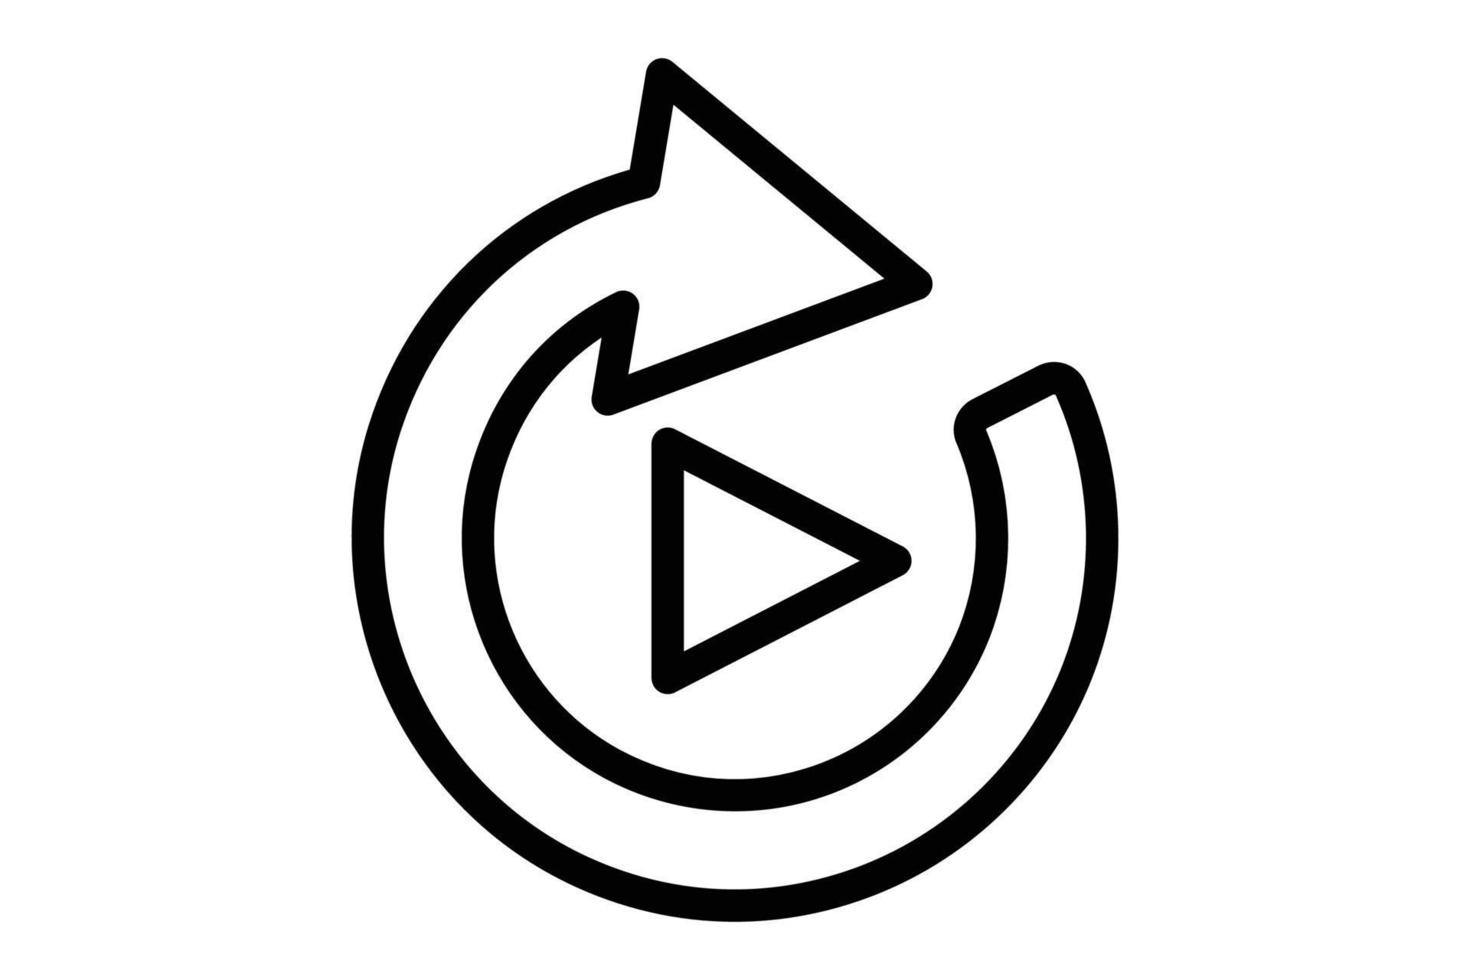 Replay icon illustration. icon related to music player. Line icon style. Simple vector design editable